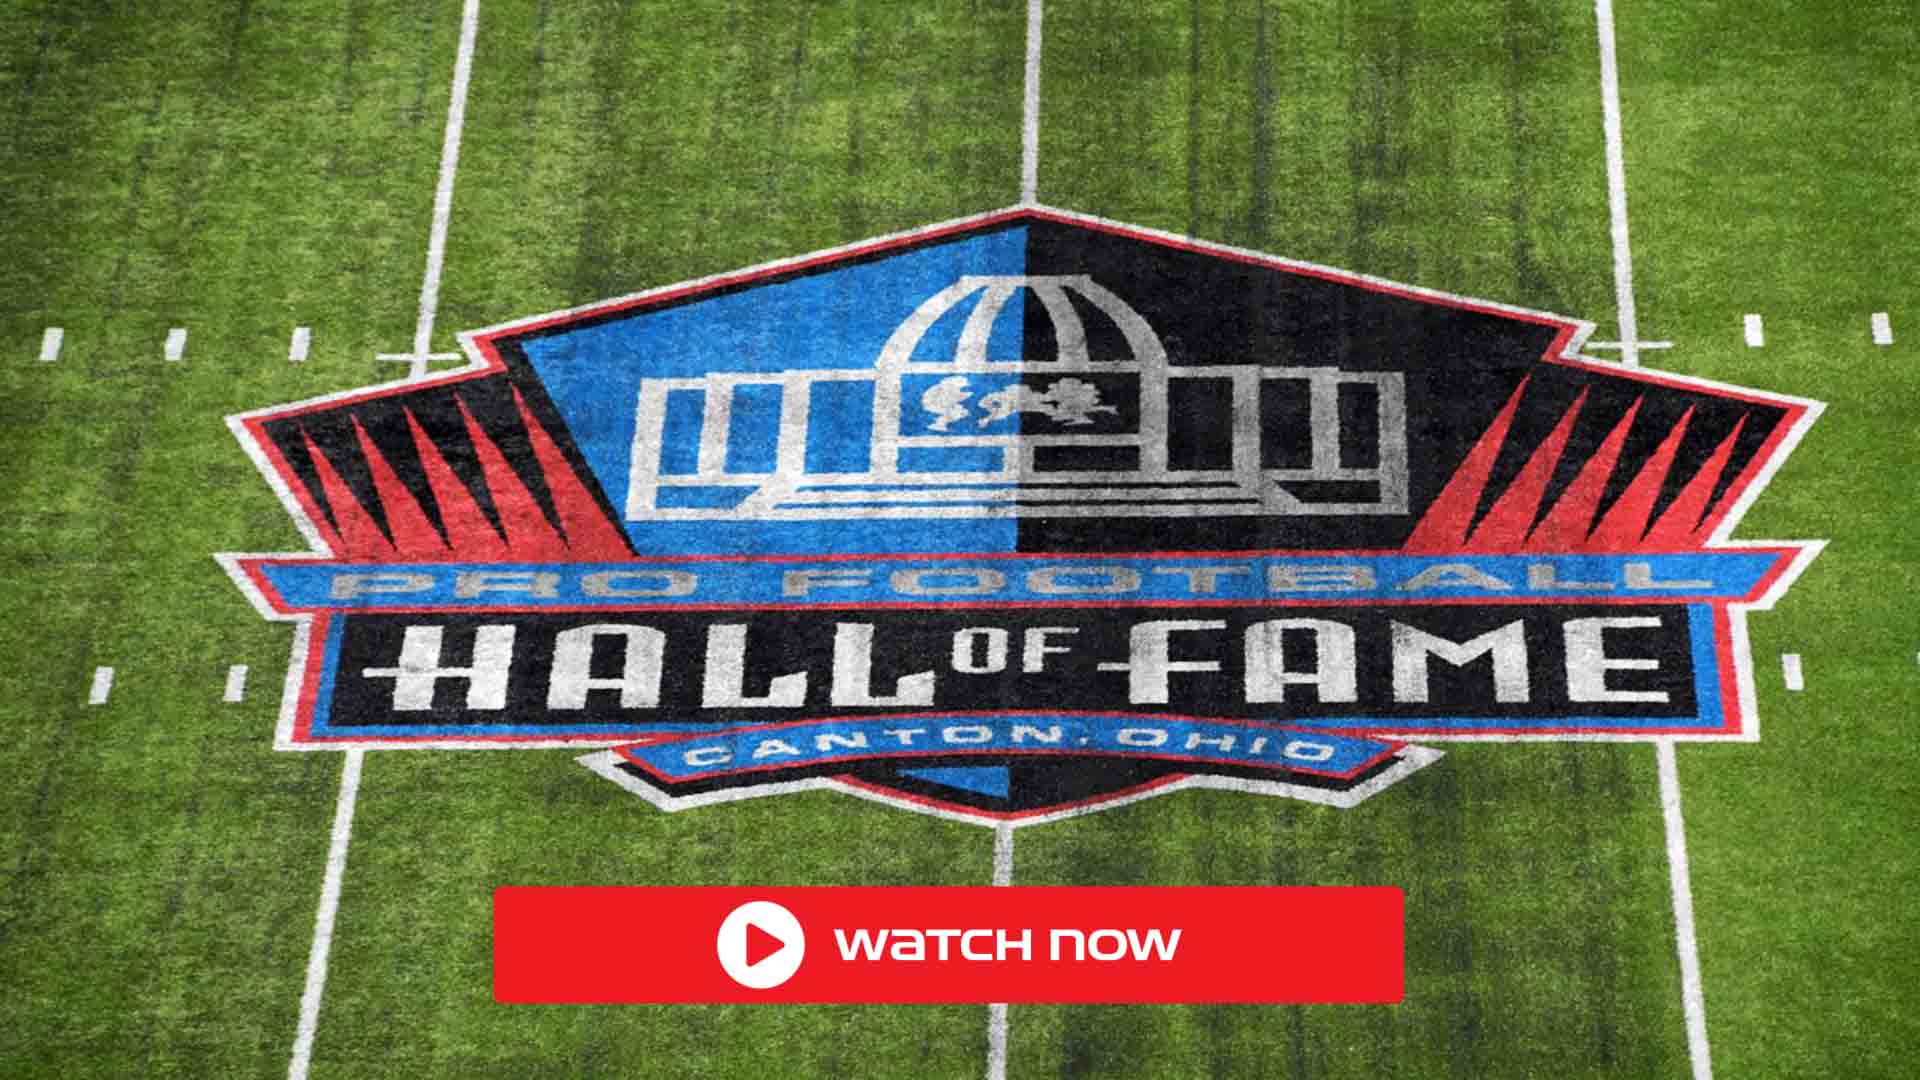 [LIVE] NFL Hall of Fame Game 2021 Live Stream, How to Watch Cowboys vs